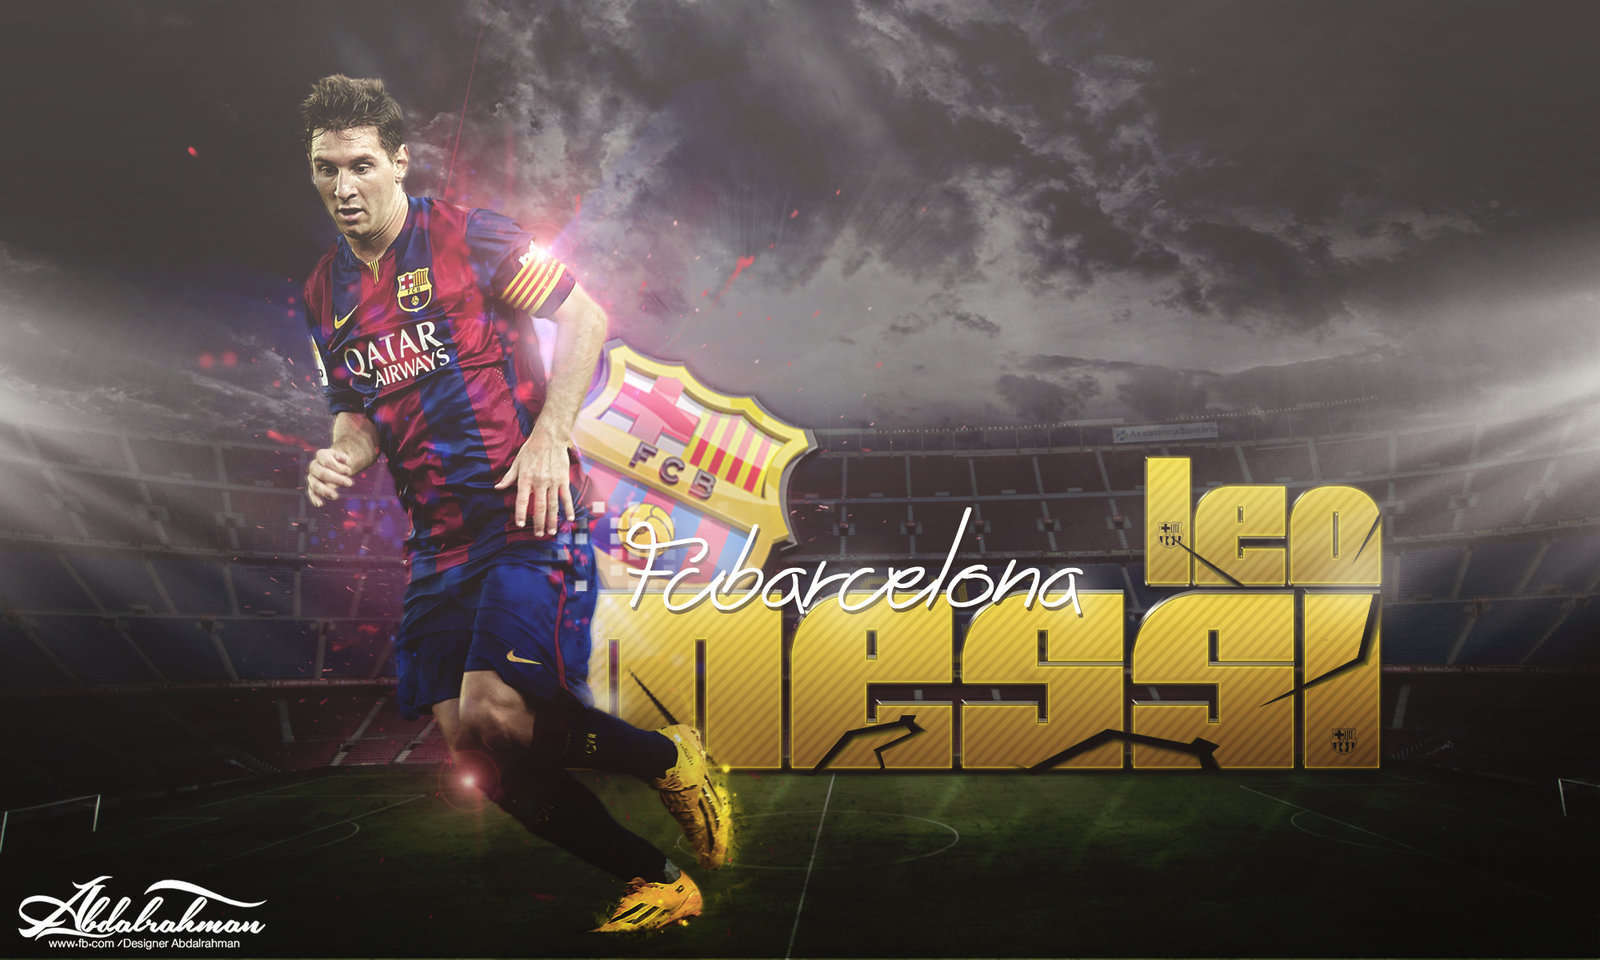 2015 Lionel Messi HD Images | AMBWallpapers